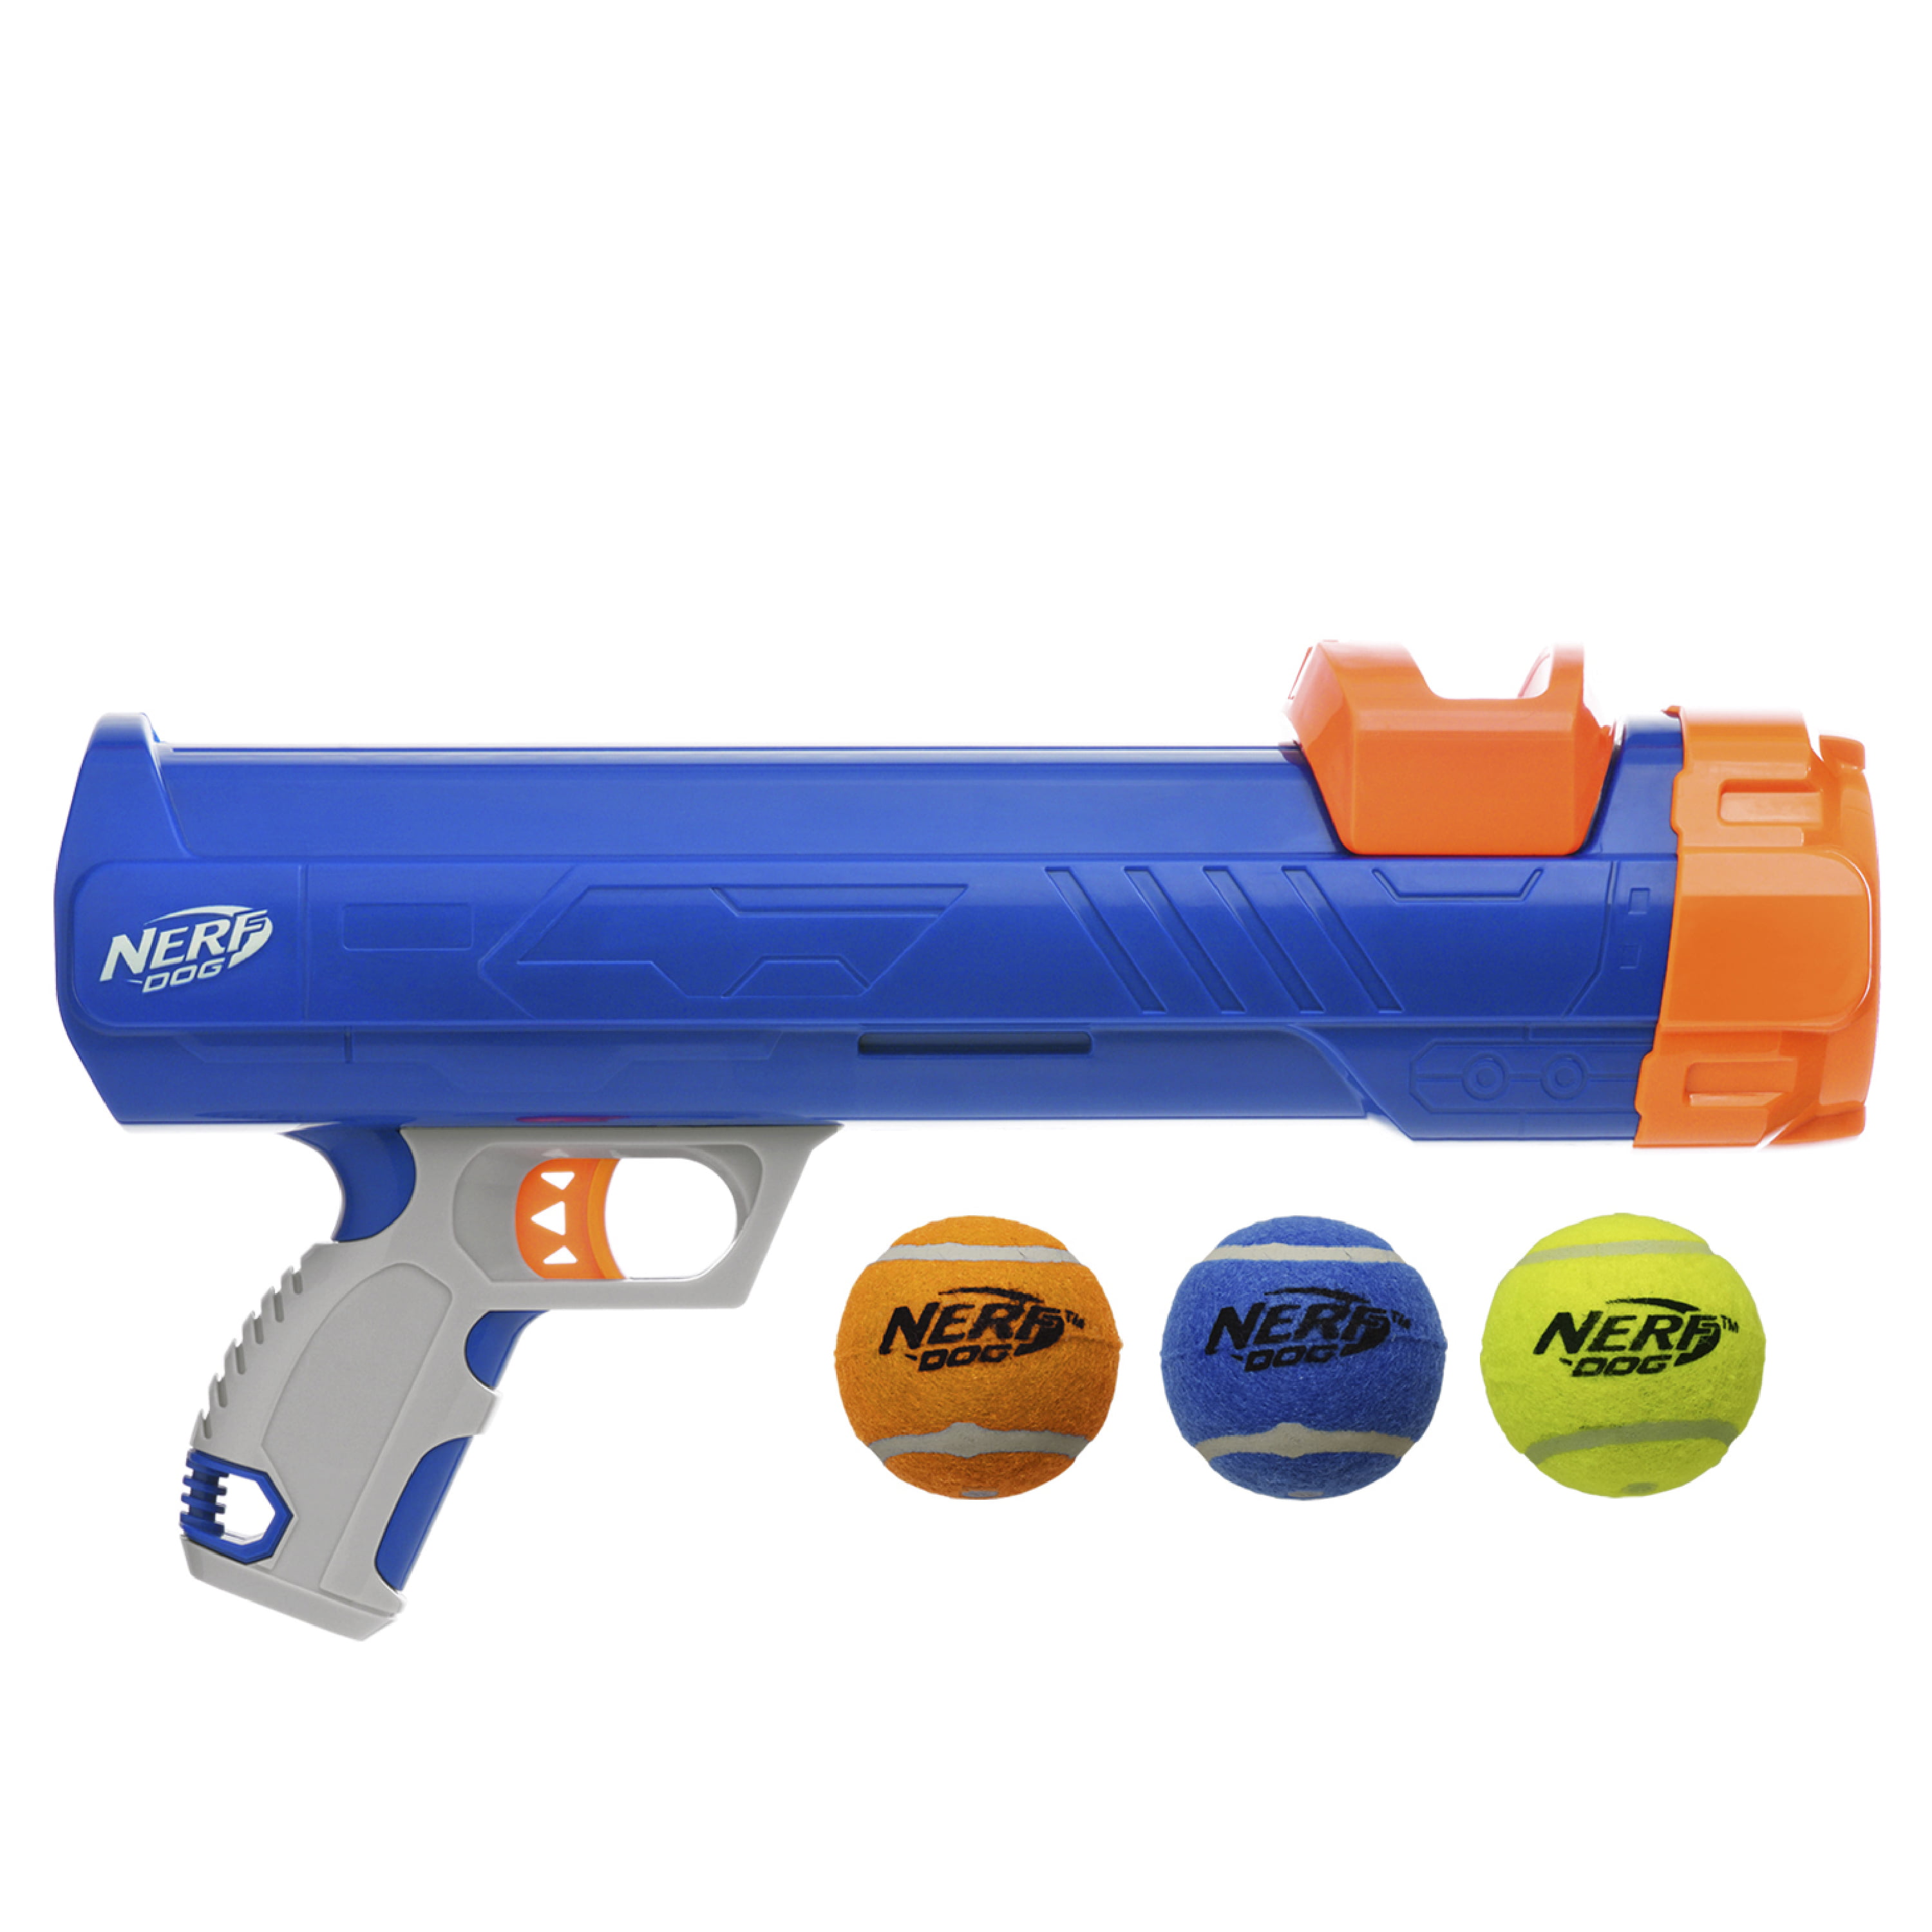 Nerf Dog 12 inch Tennis Ball Blaster Dog with 3 Balls, Launches up to 35 Walmart.com